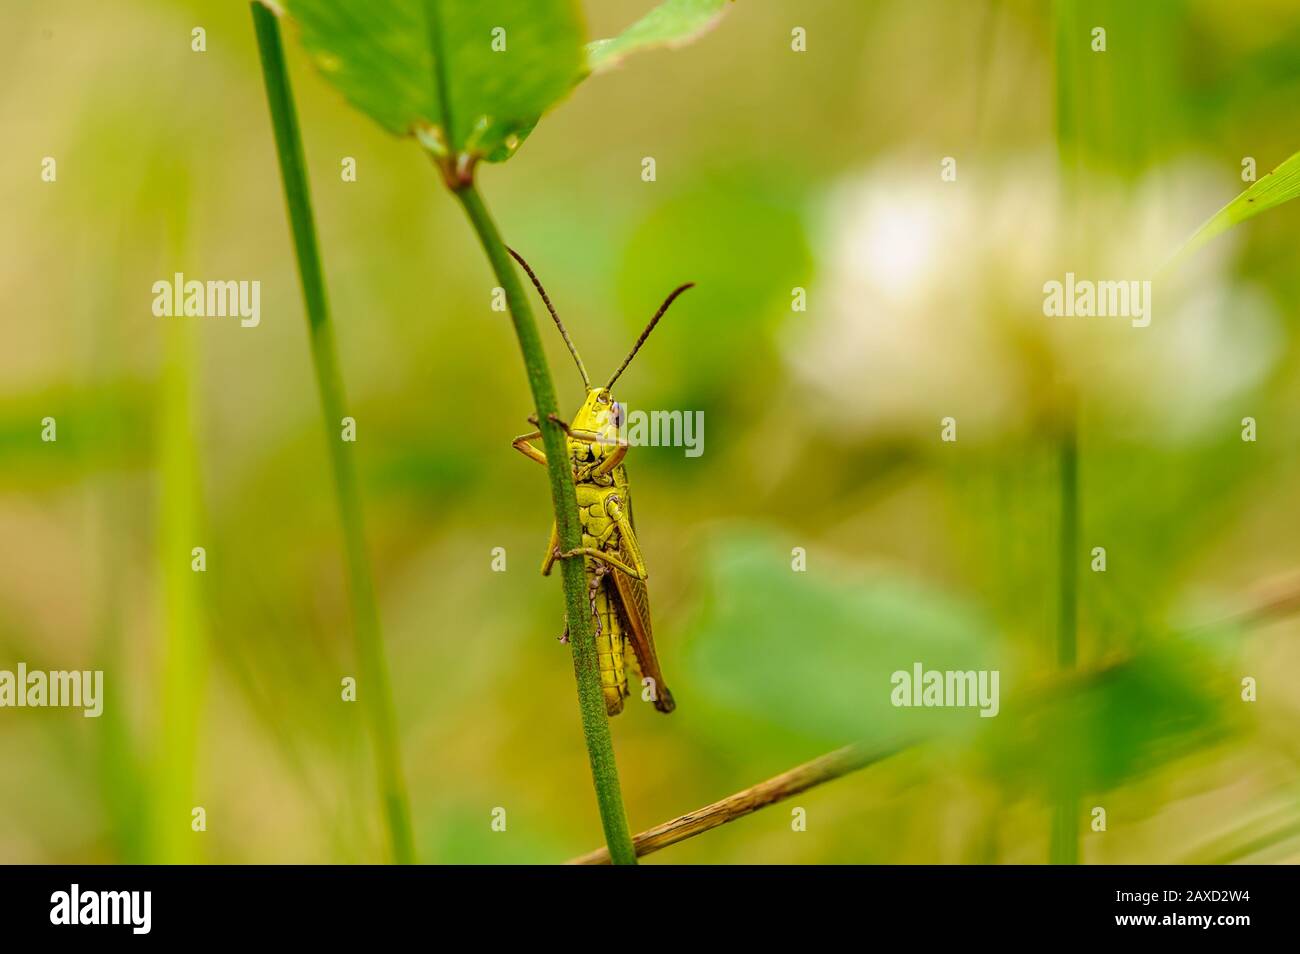 Macro of a green grasshopper on a blurred yellow-green background Stock Photo